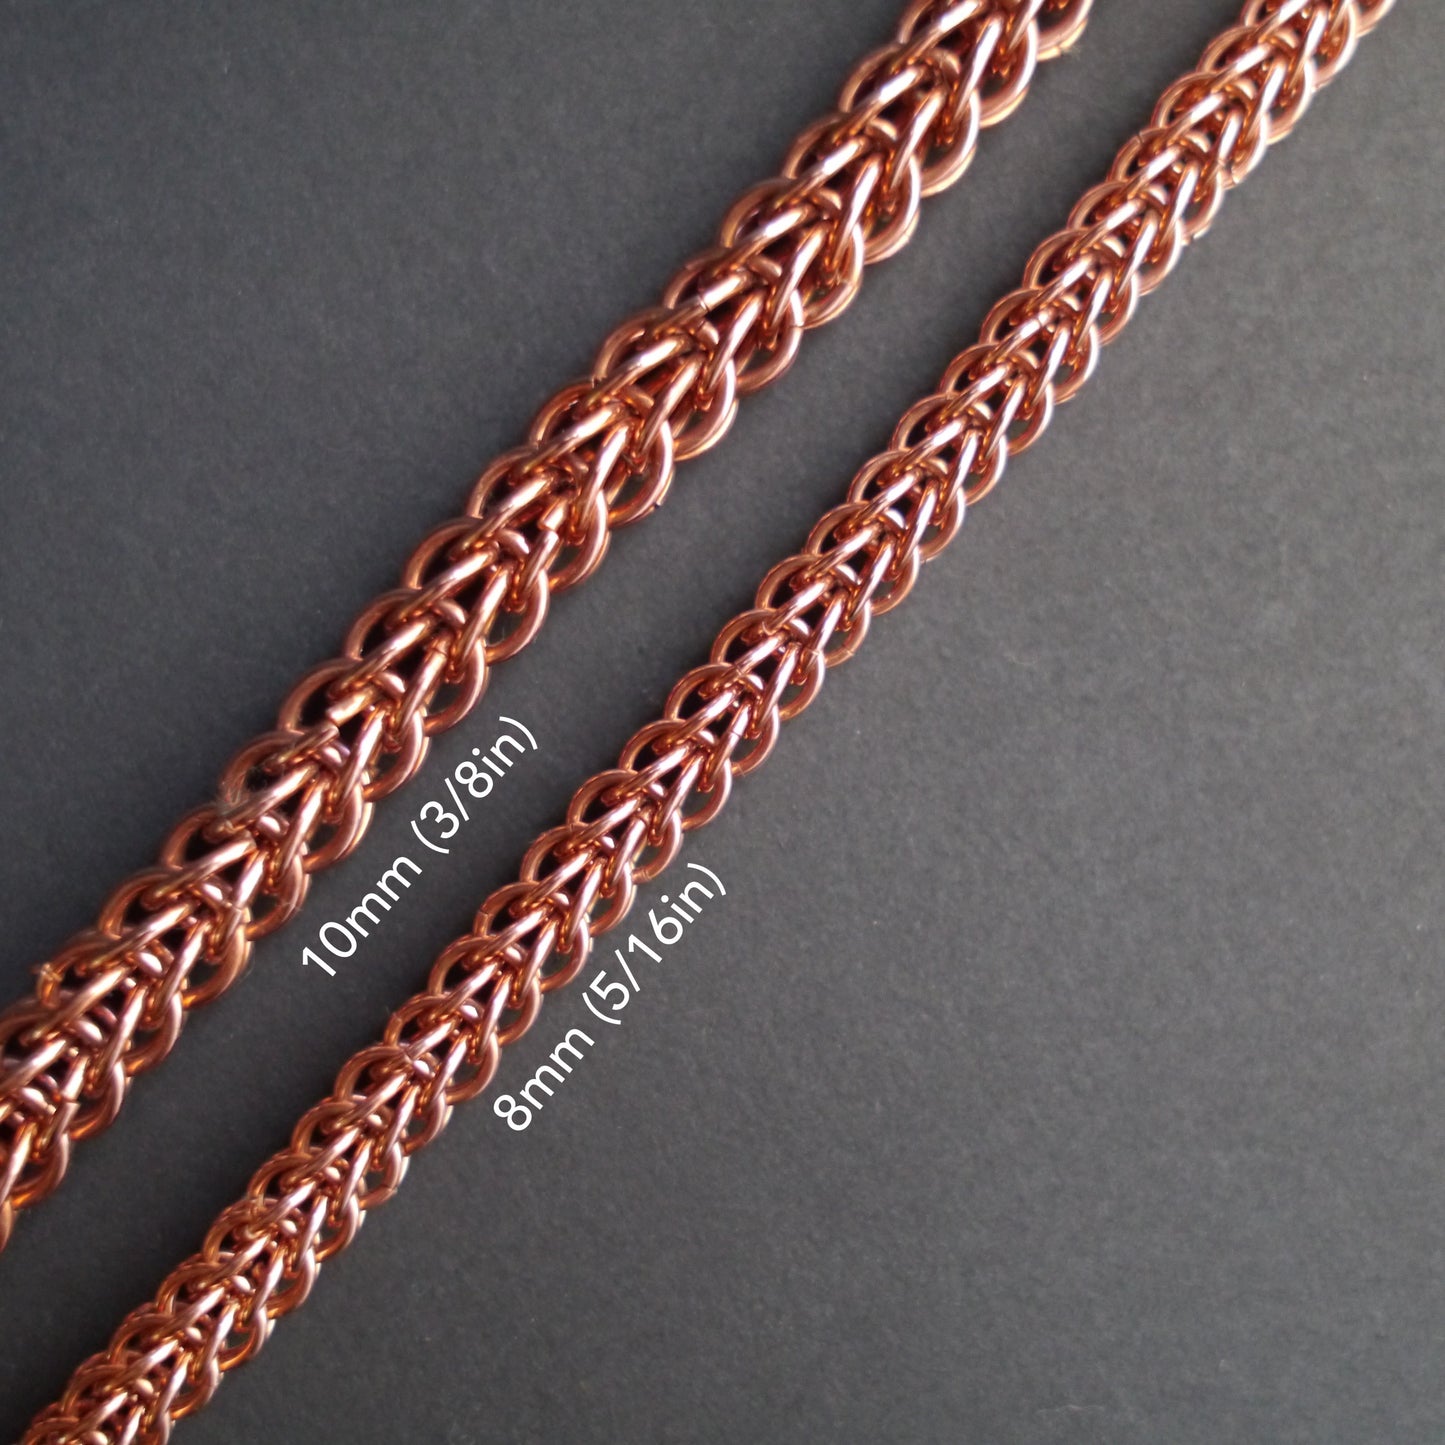 8mm Full Persian Chainmaille Bracelet in Copper